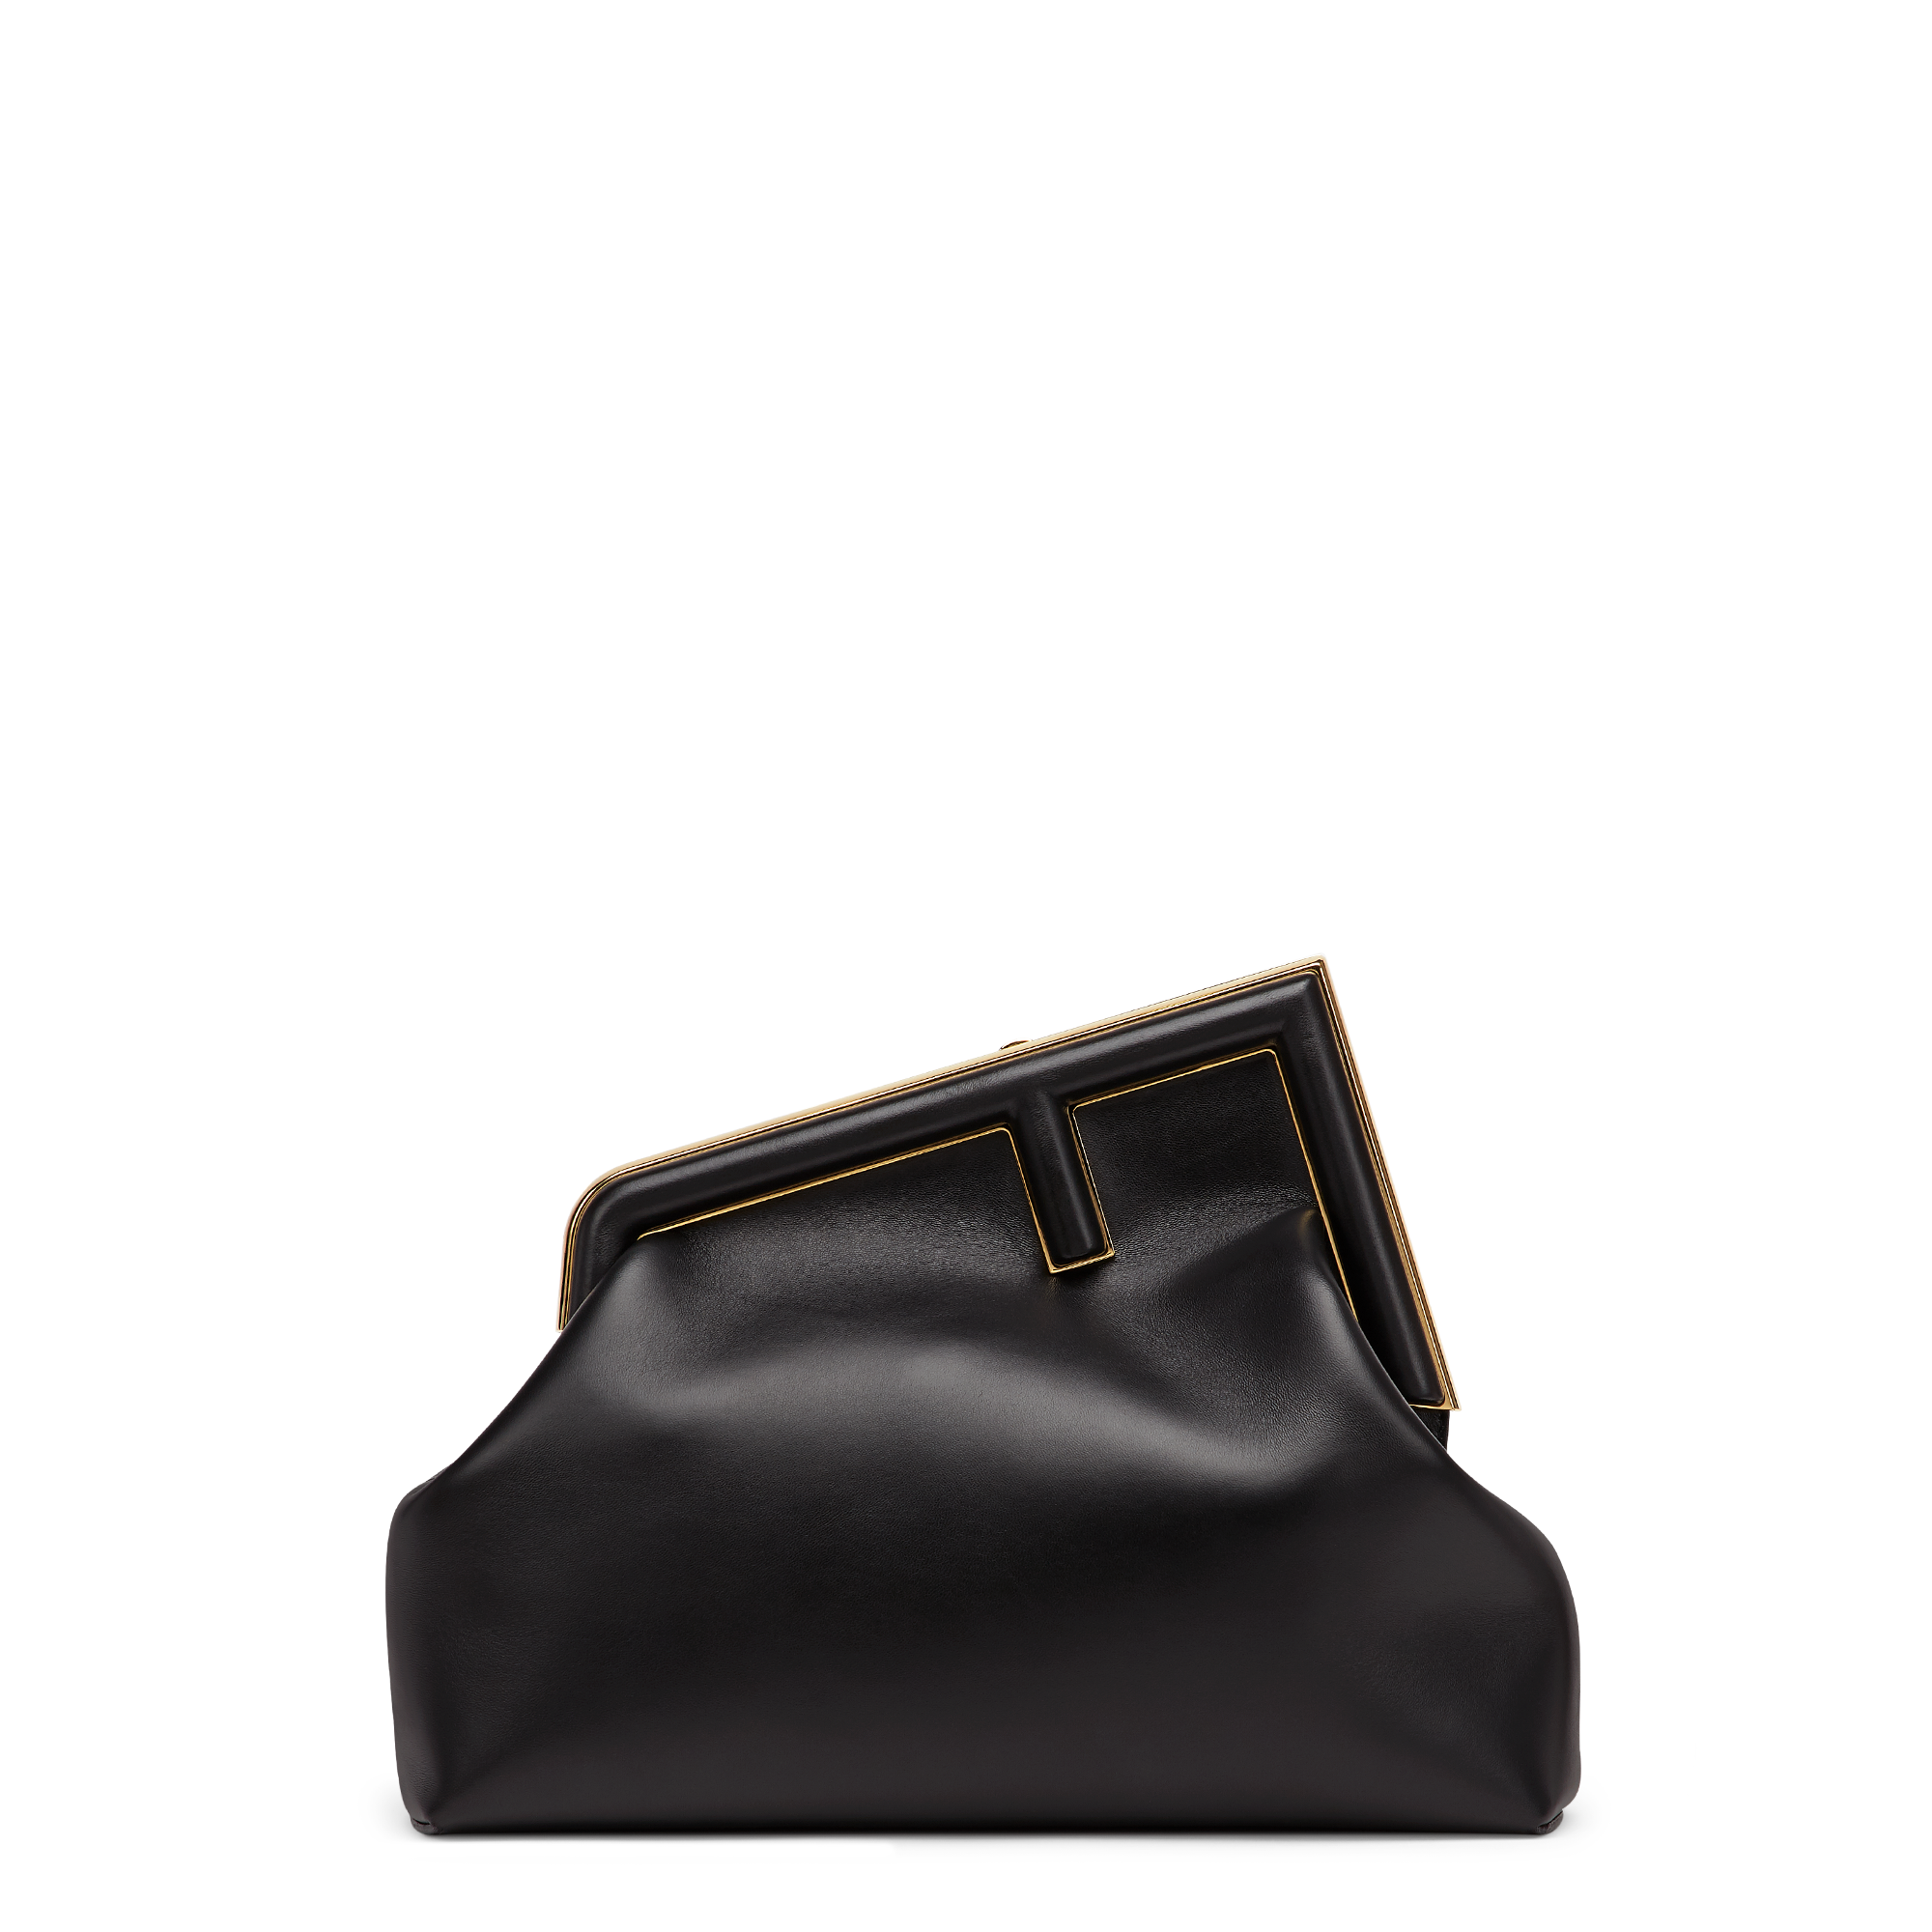 The perfect bag – FENDI First by Kim Jones for his first ready-to-wear